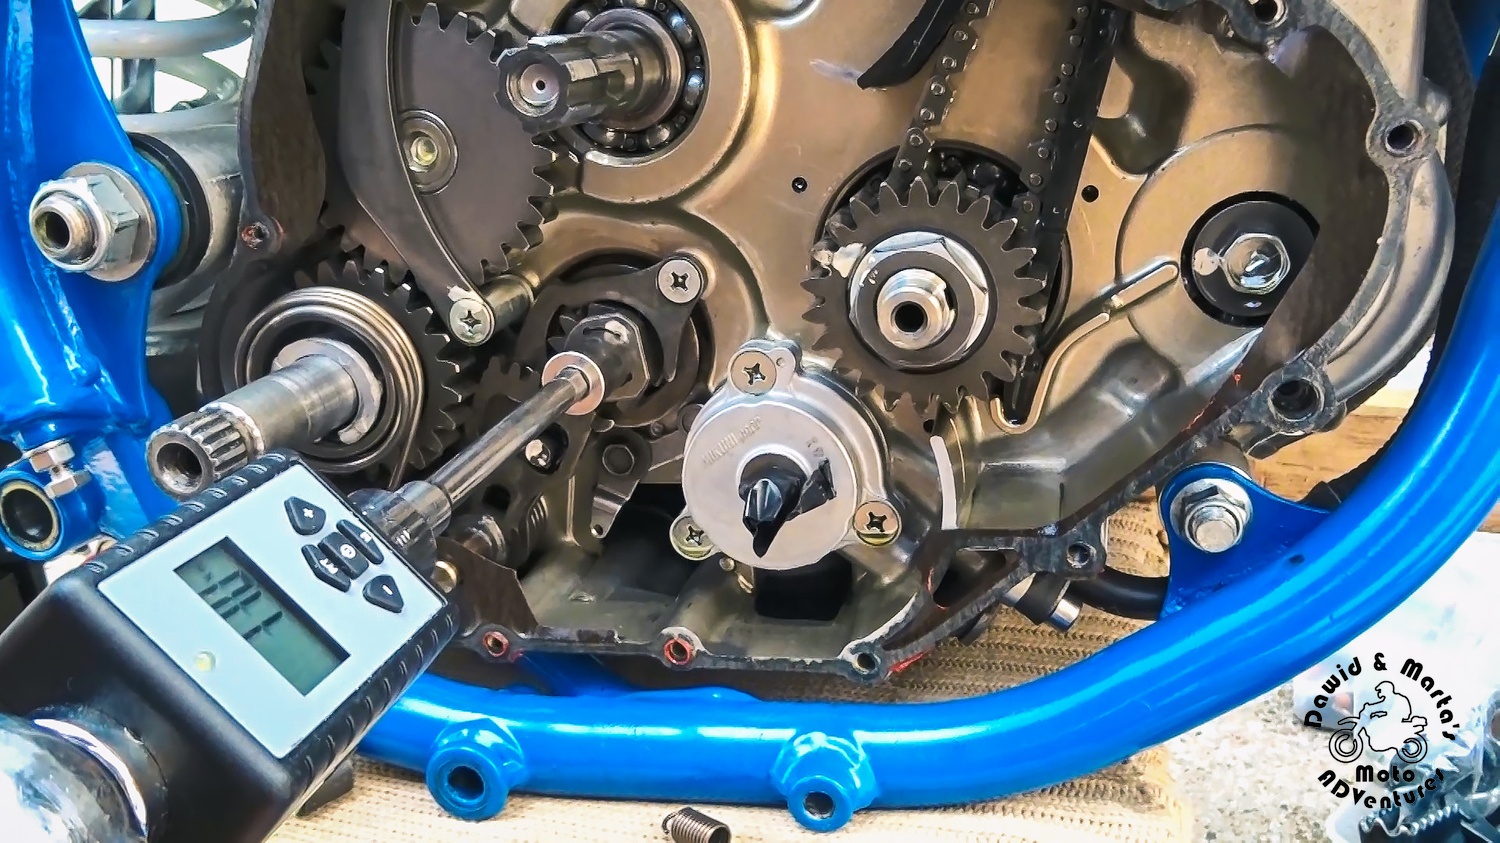 Adding more torque to shift drum bolt with a torque wrench